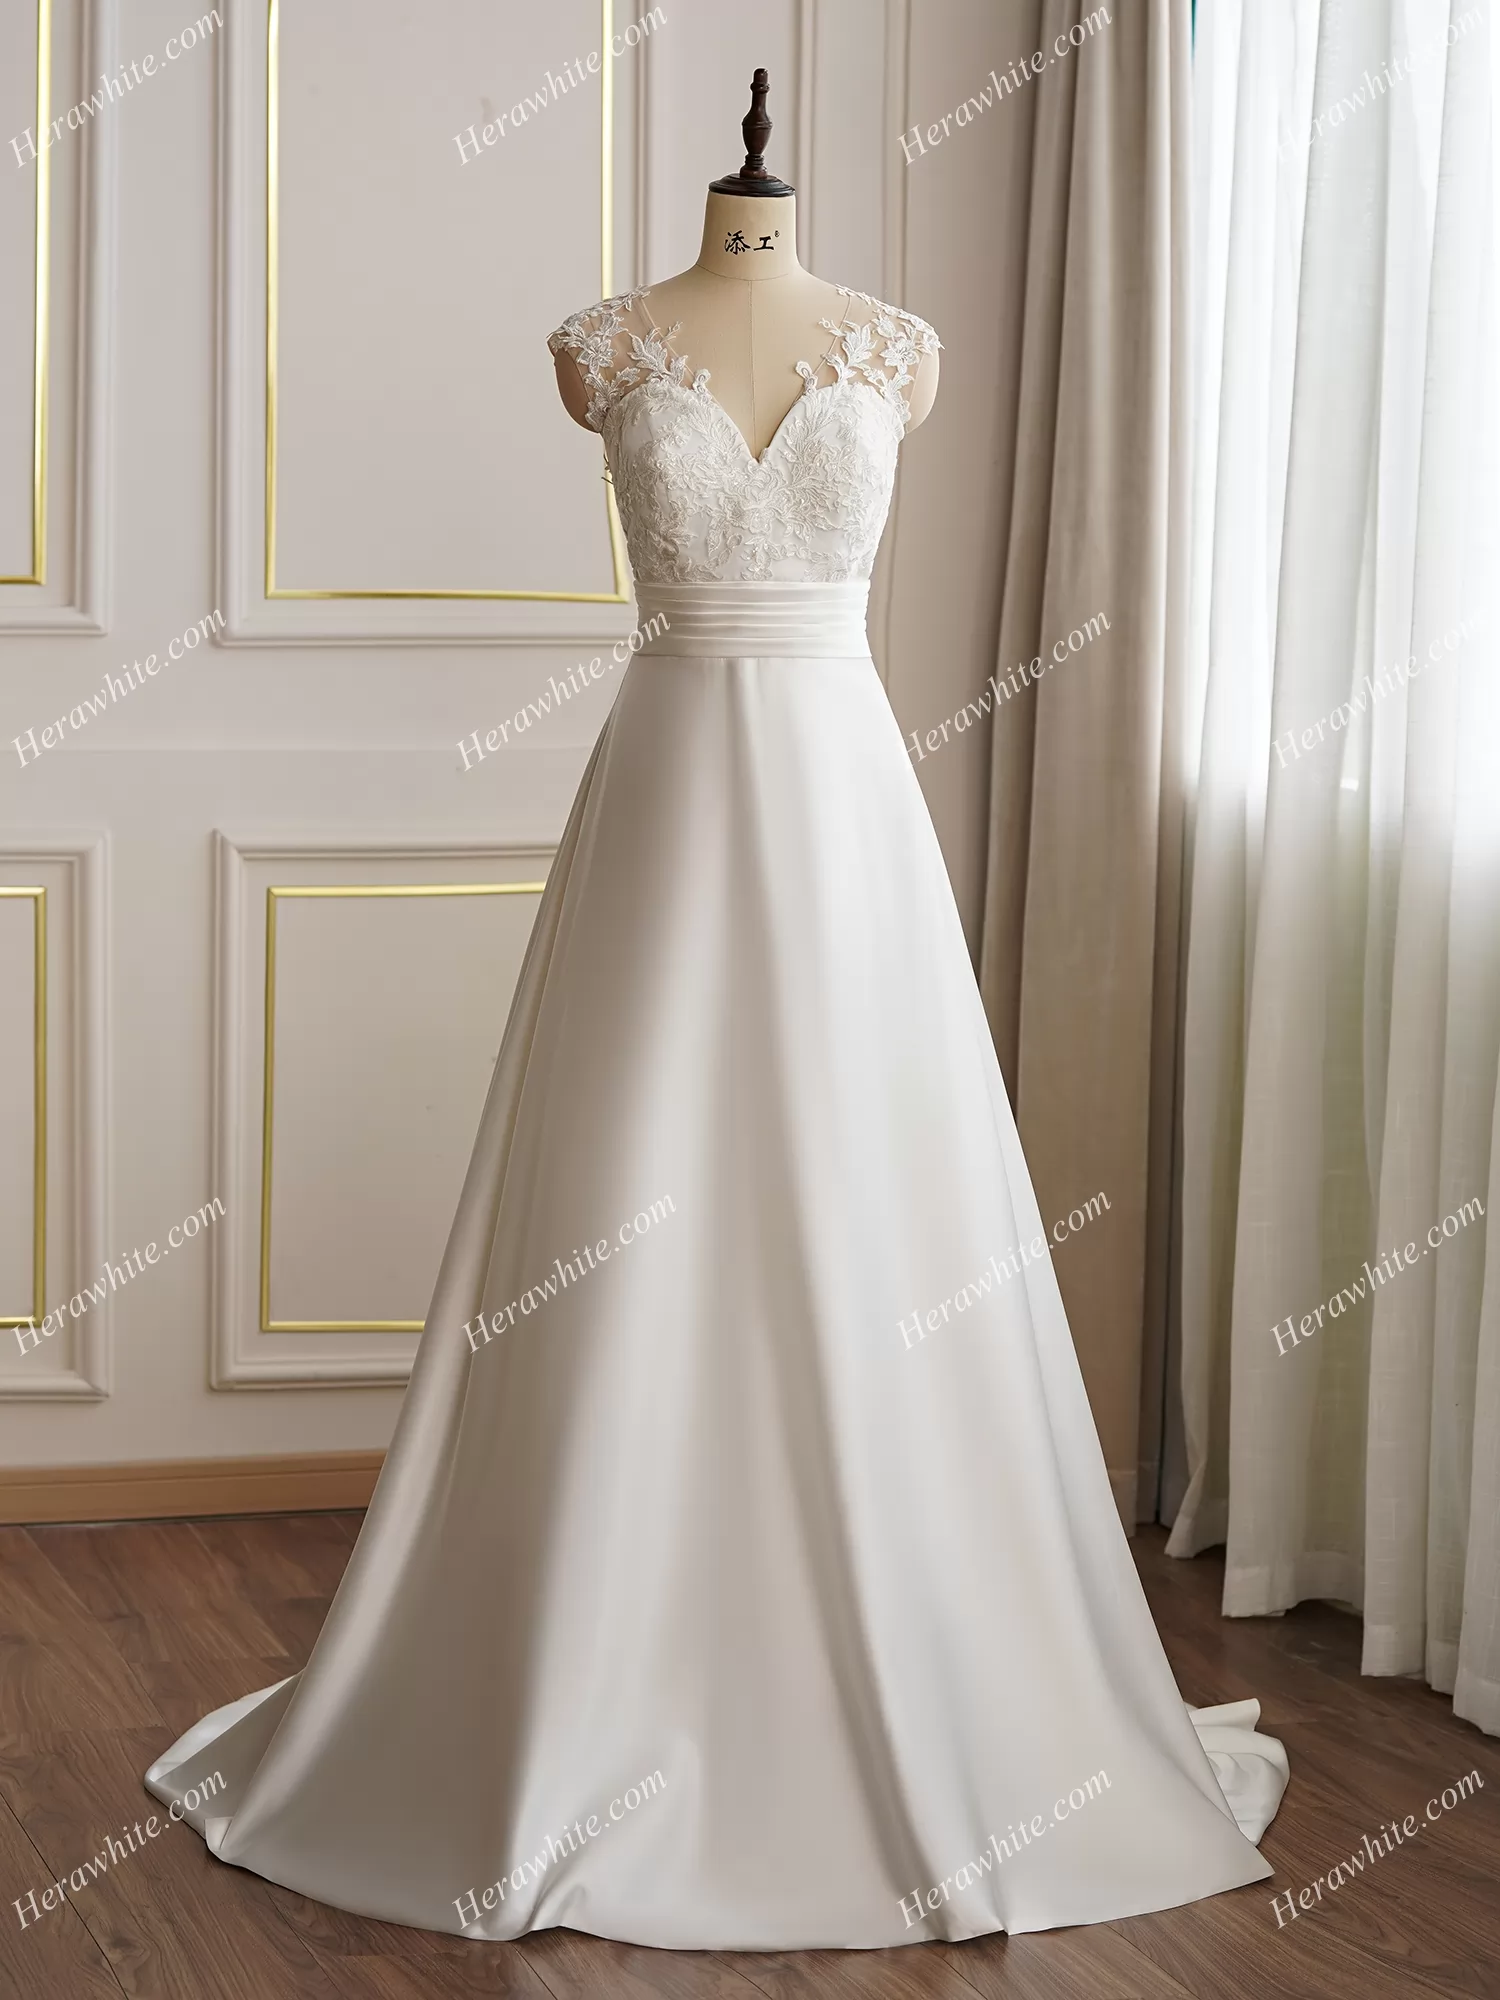 Classic Satin A-line Wedding Dress With Illusion Back